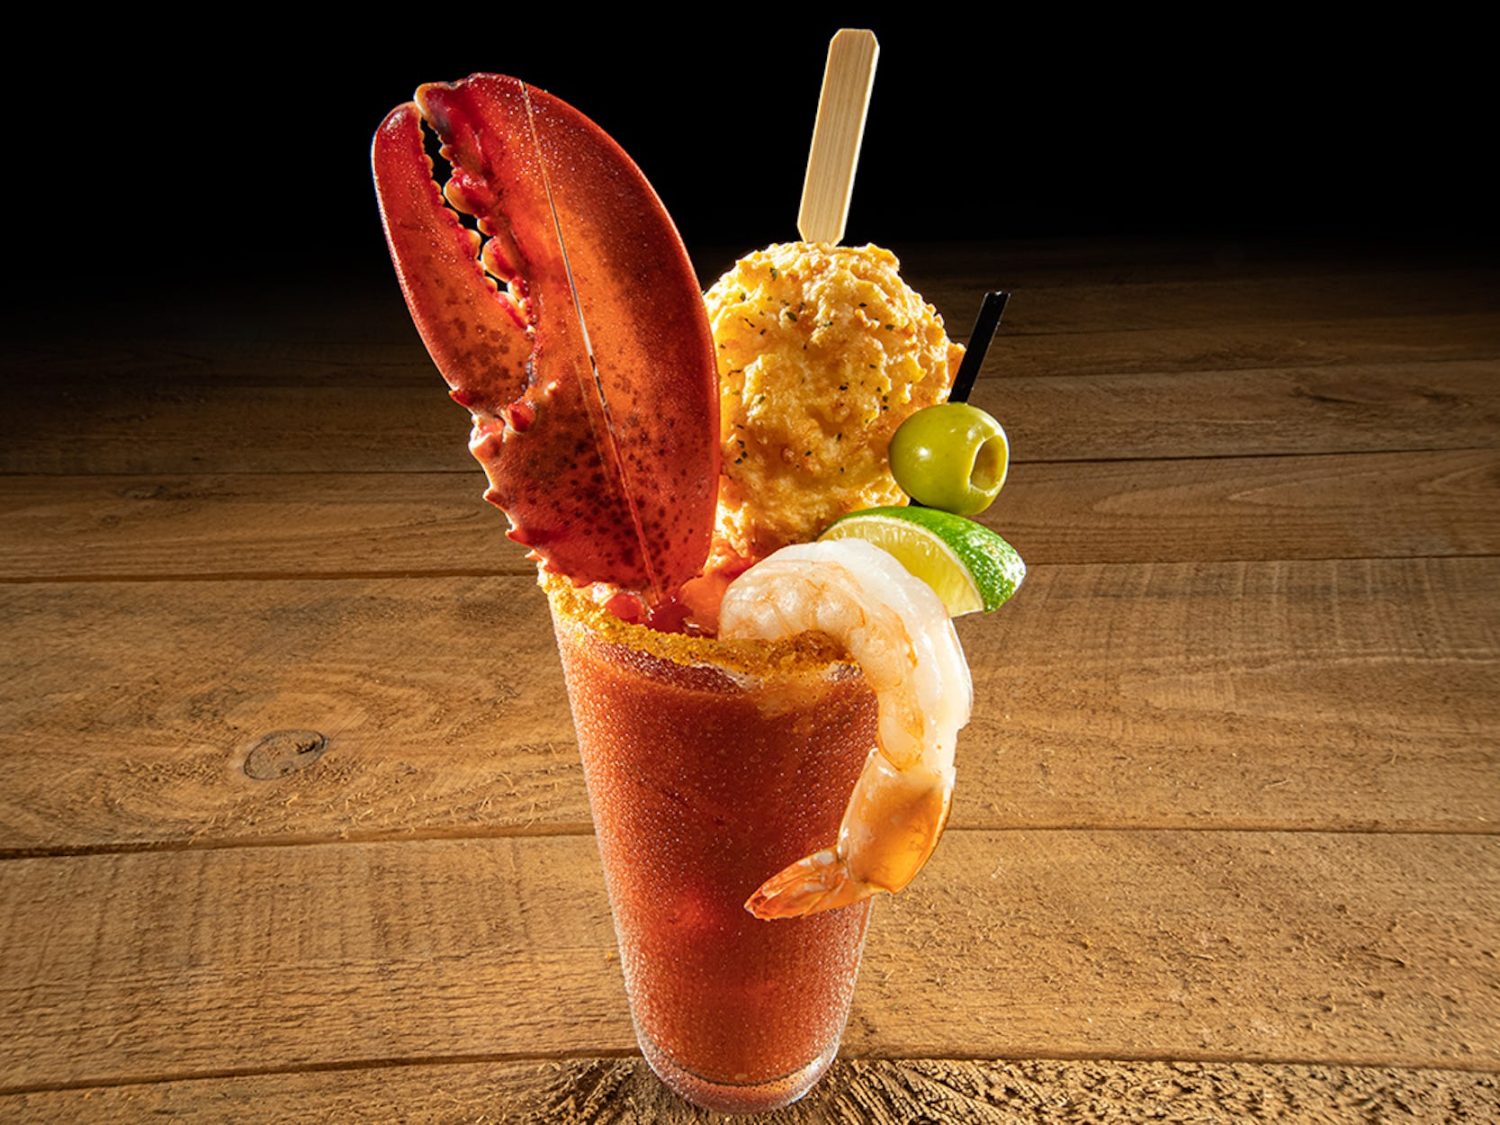 Red Lobster Reveals Unconventional Lobster Claw Bloody Mary Drink with Cheddar Bay Biscuit